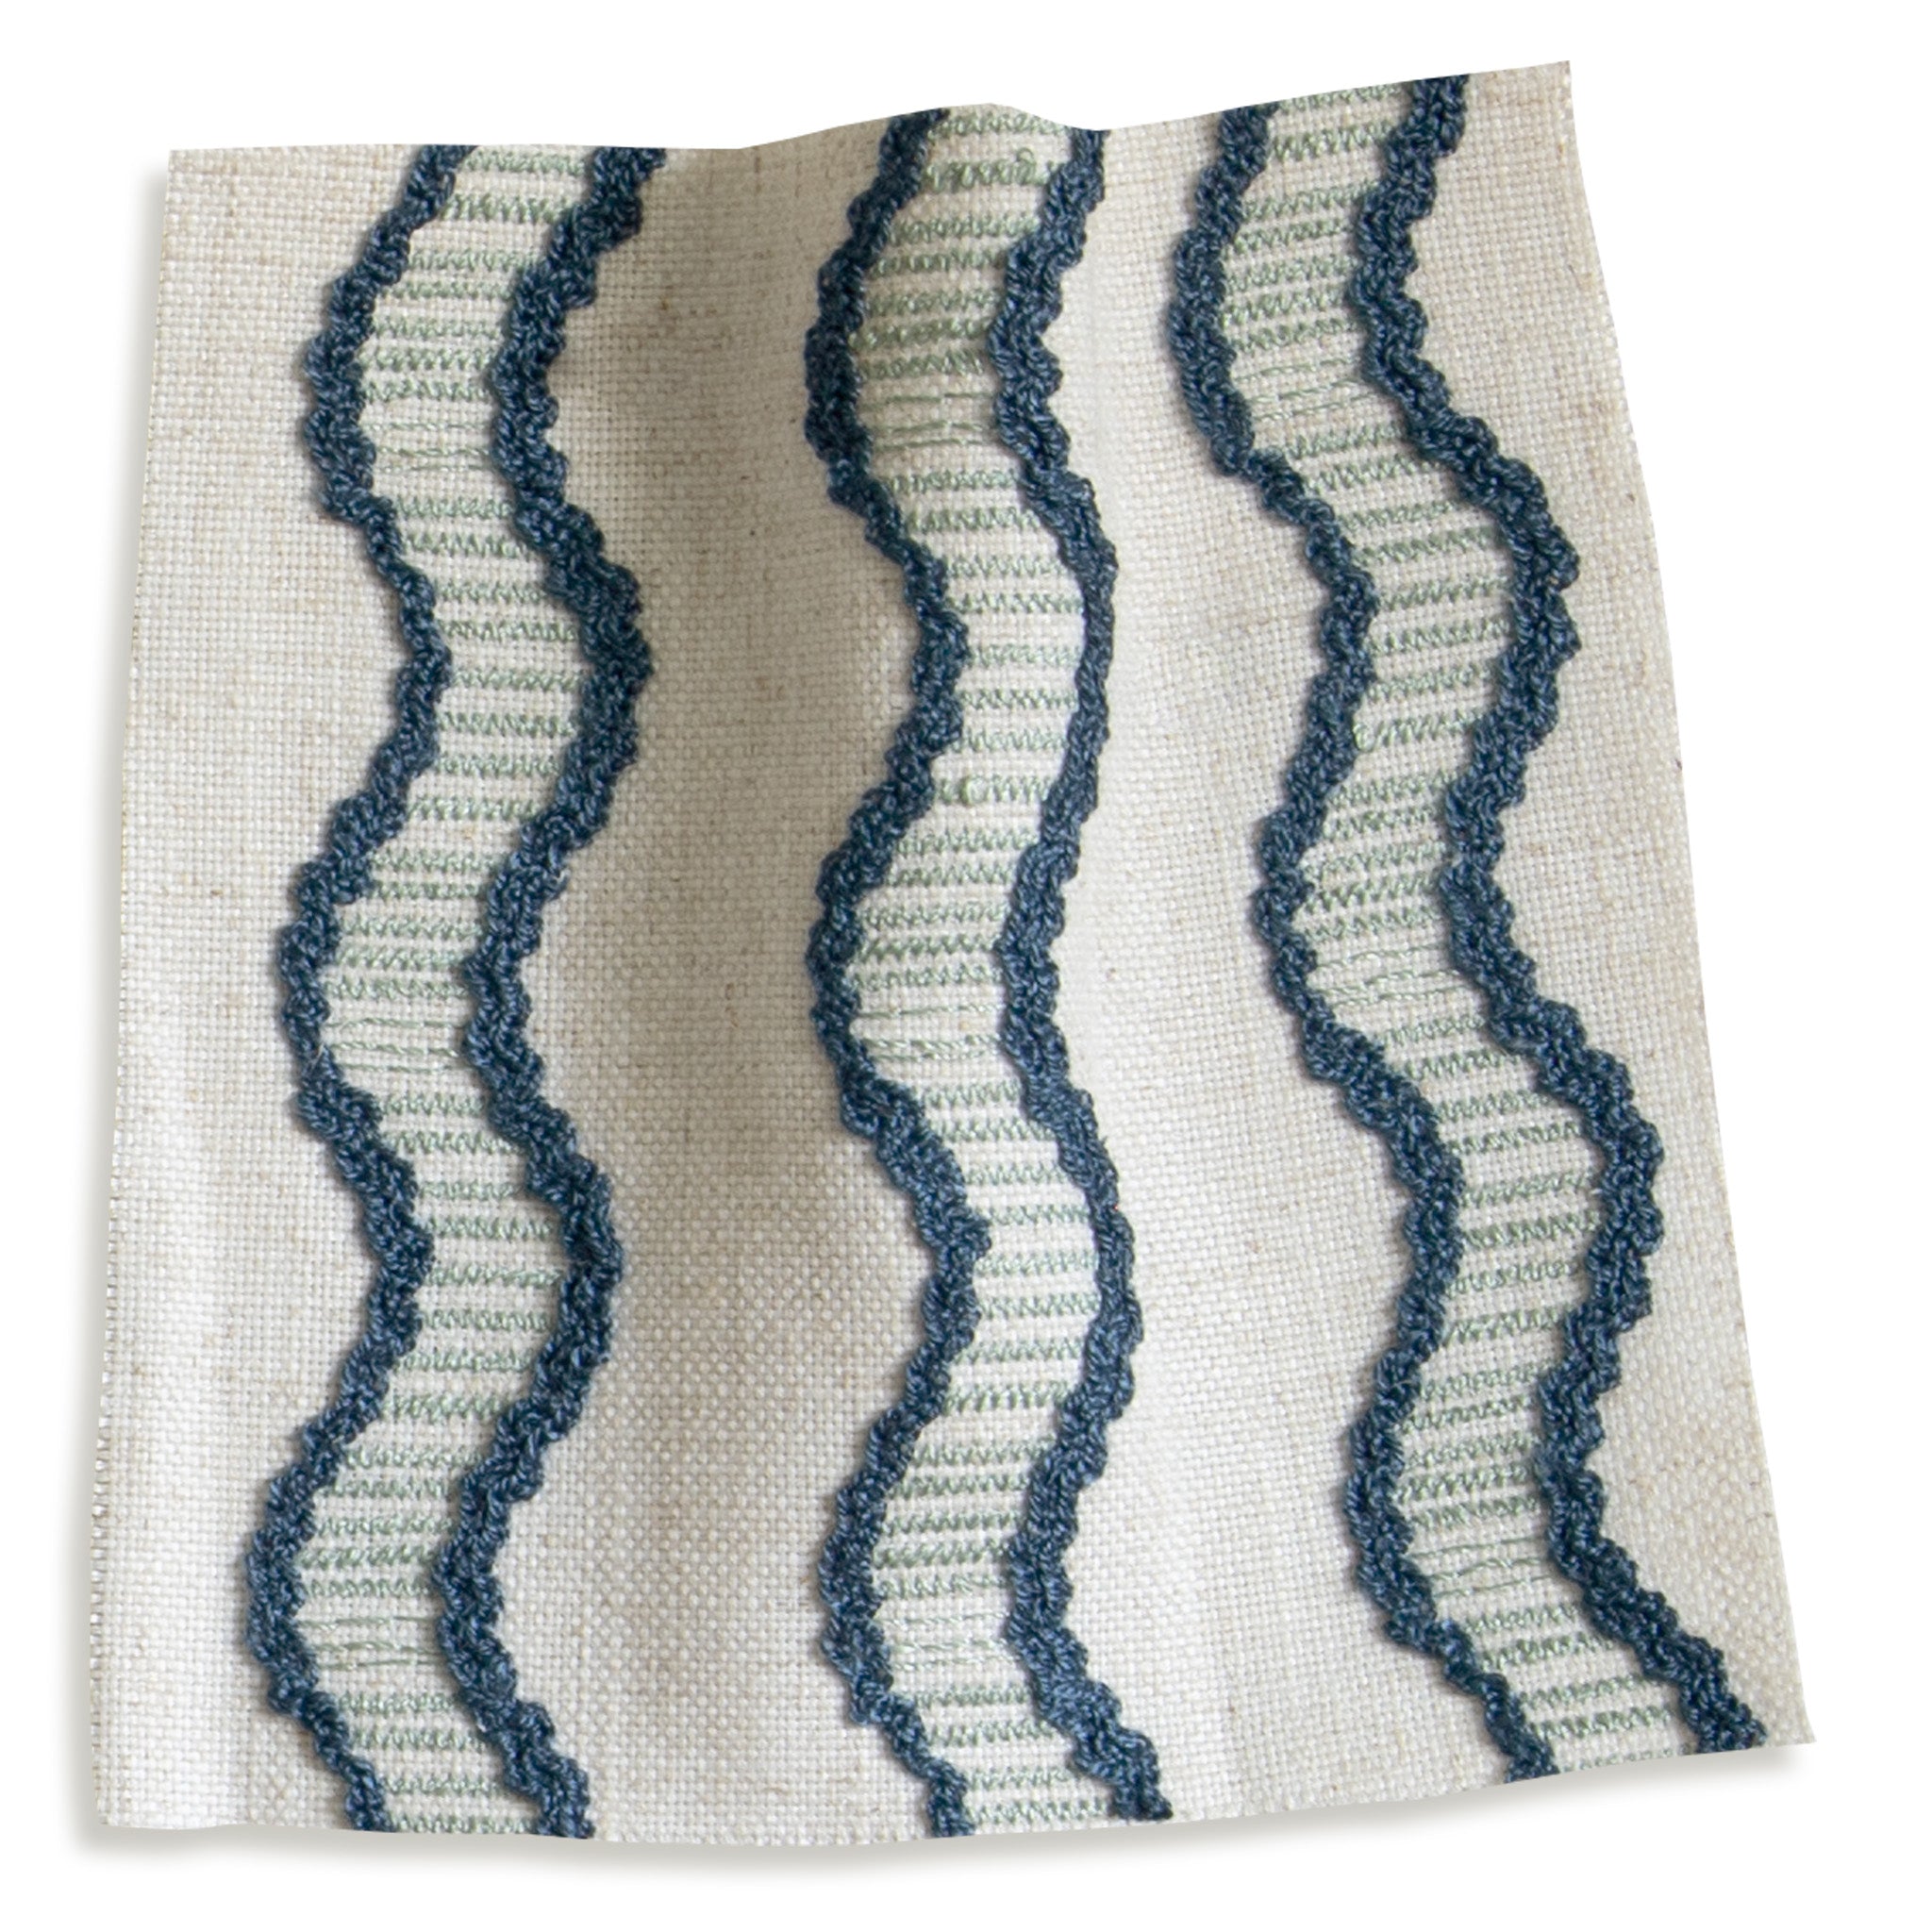 embroidered cream and navy blue wavy lines fabric swatch